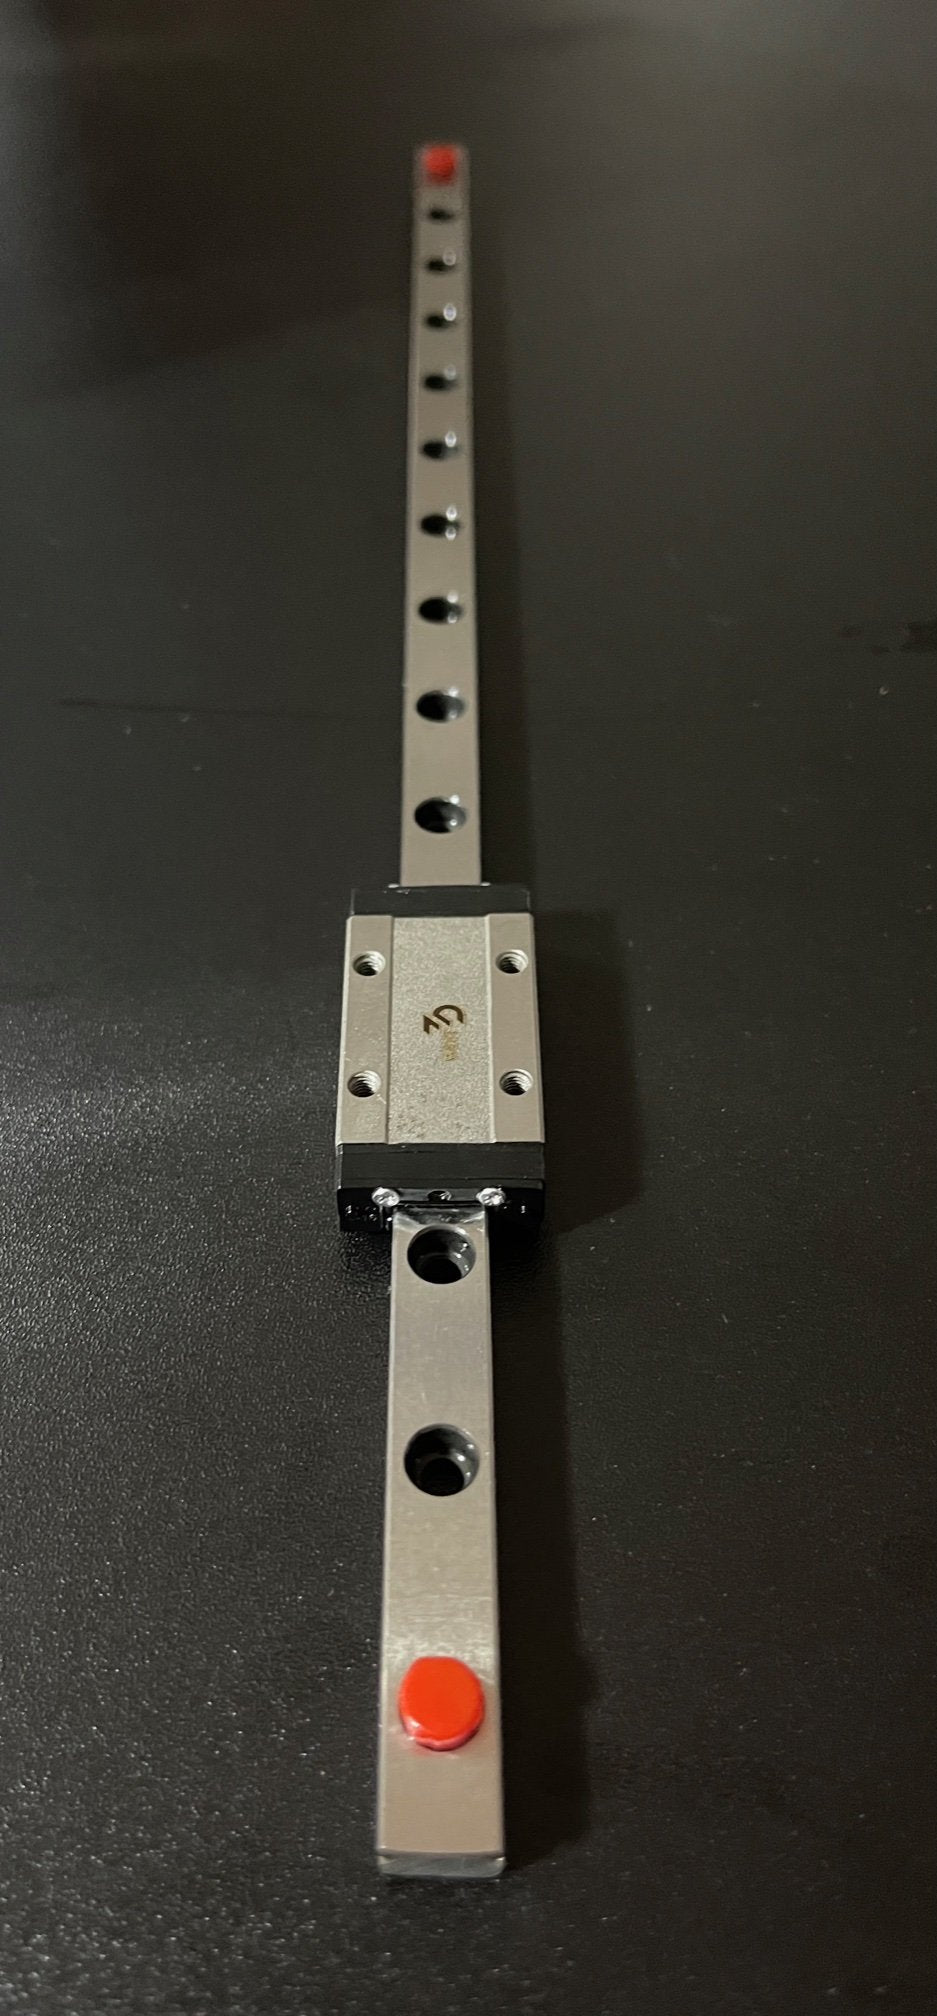 West3D Printing MGN7H-1R-150 Linear Rails with Carriages (CNA) - West3D Printing - CNA / West3D